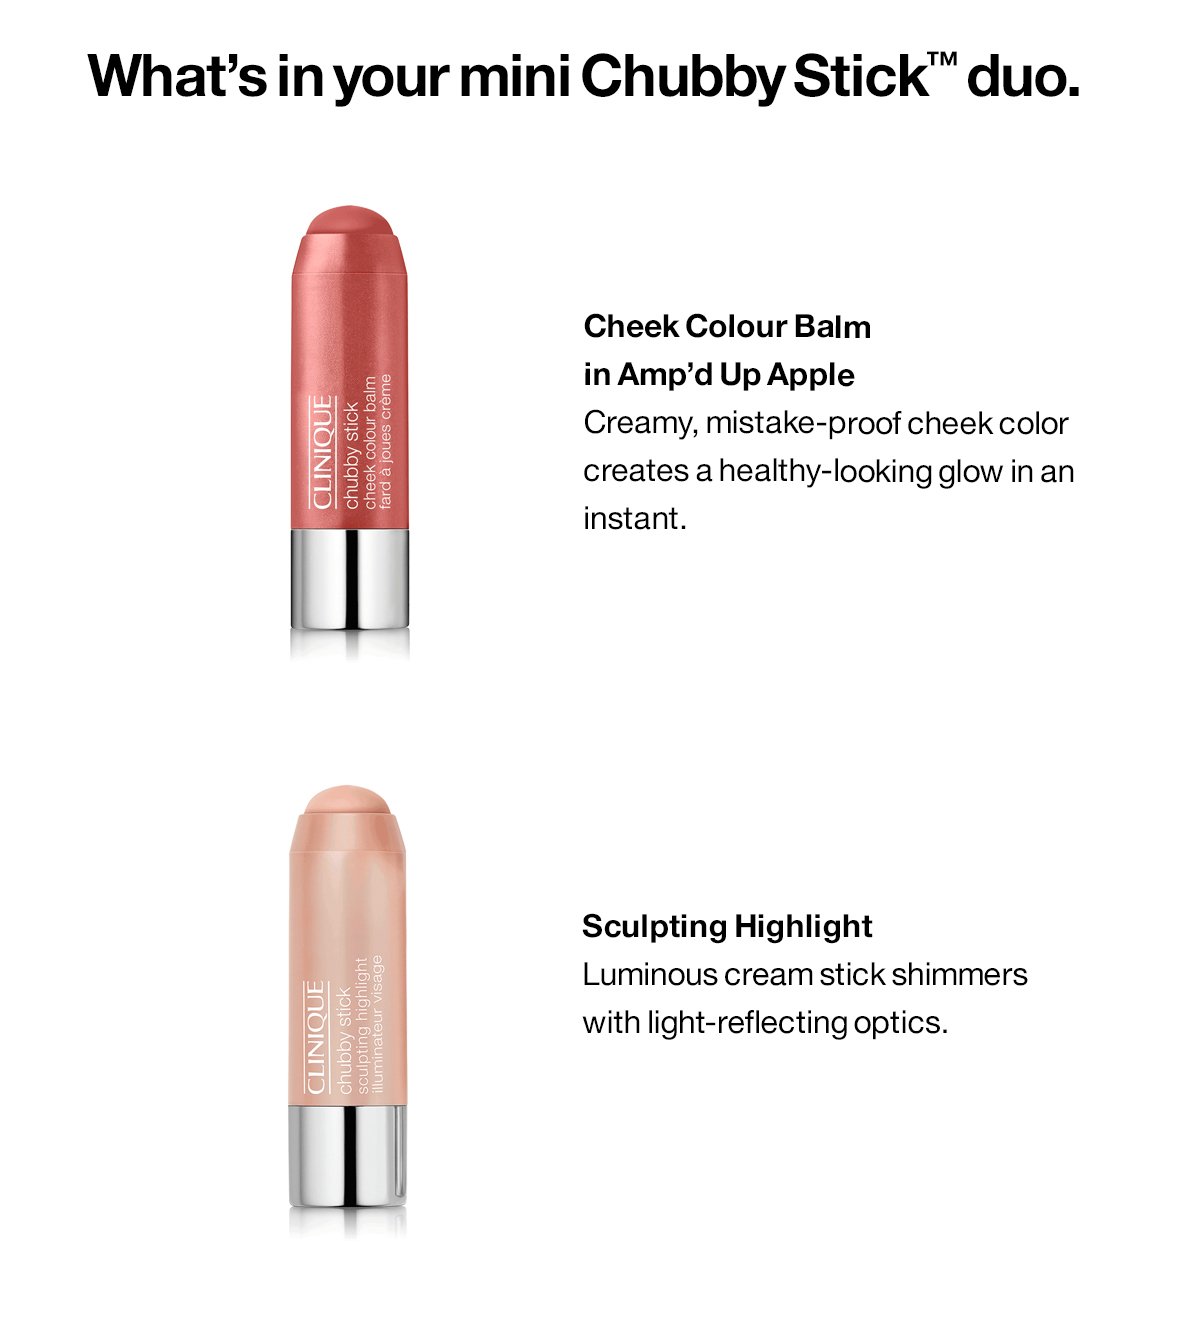 What’s in your mini Chubby Stick™ duo. Cheek Colour Balm in Amp’d Up Apple-Creamy, mistake-proof cheek color creates a healthy-looking glow in an instant. Sculpting Highlight-Luminous cream stick shimmers with light-reflecting optics.